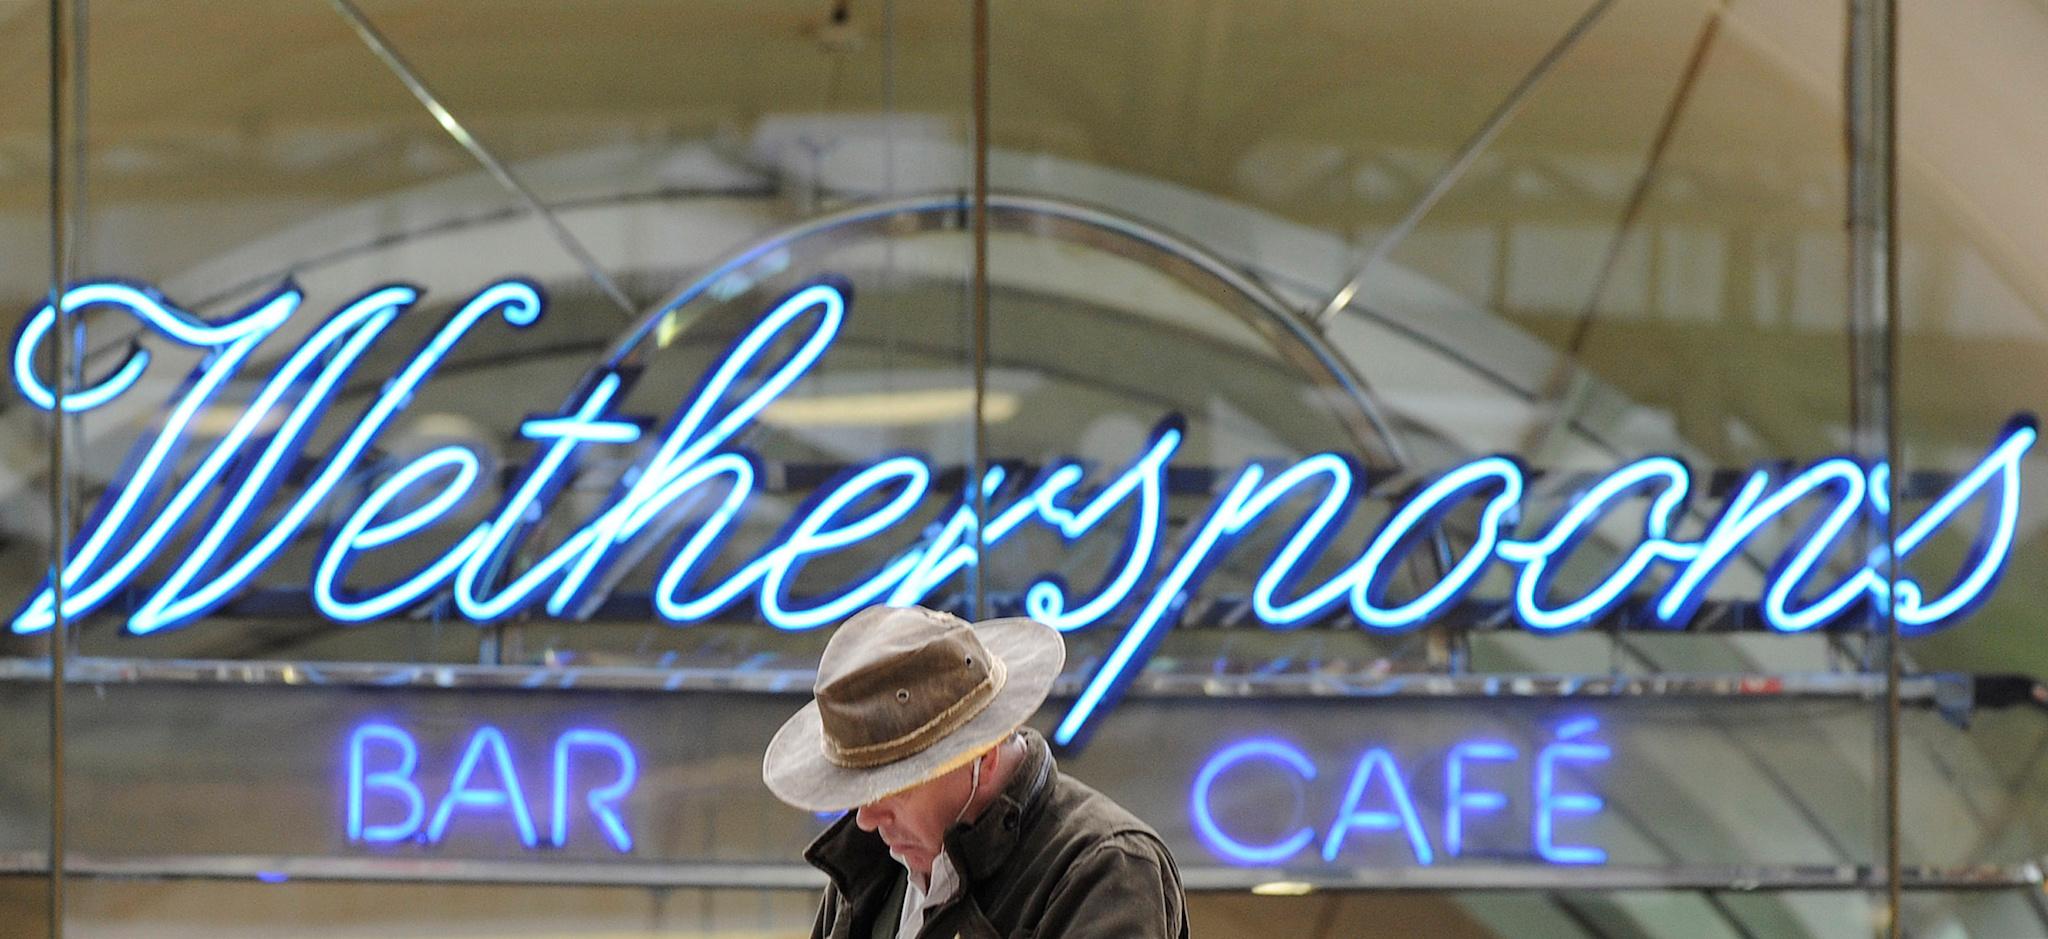 A Wetherspoon's logo is seen at a bar in central London March 13, 2009